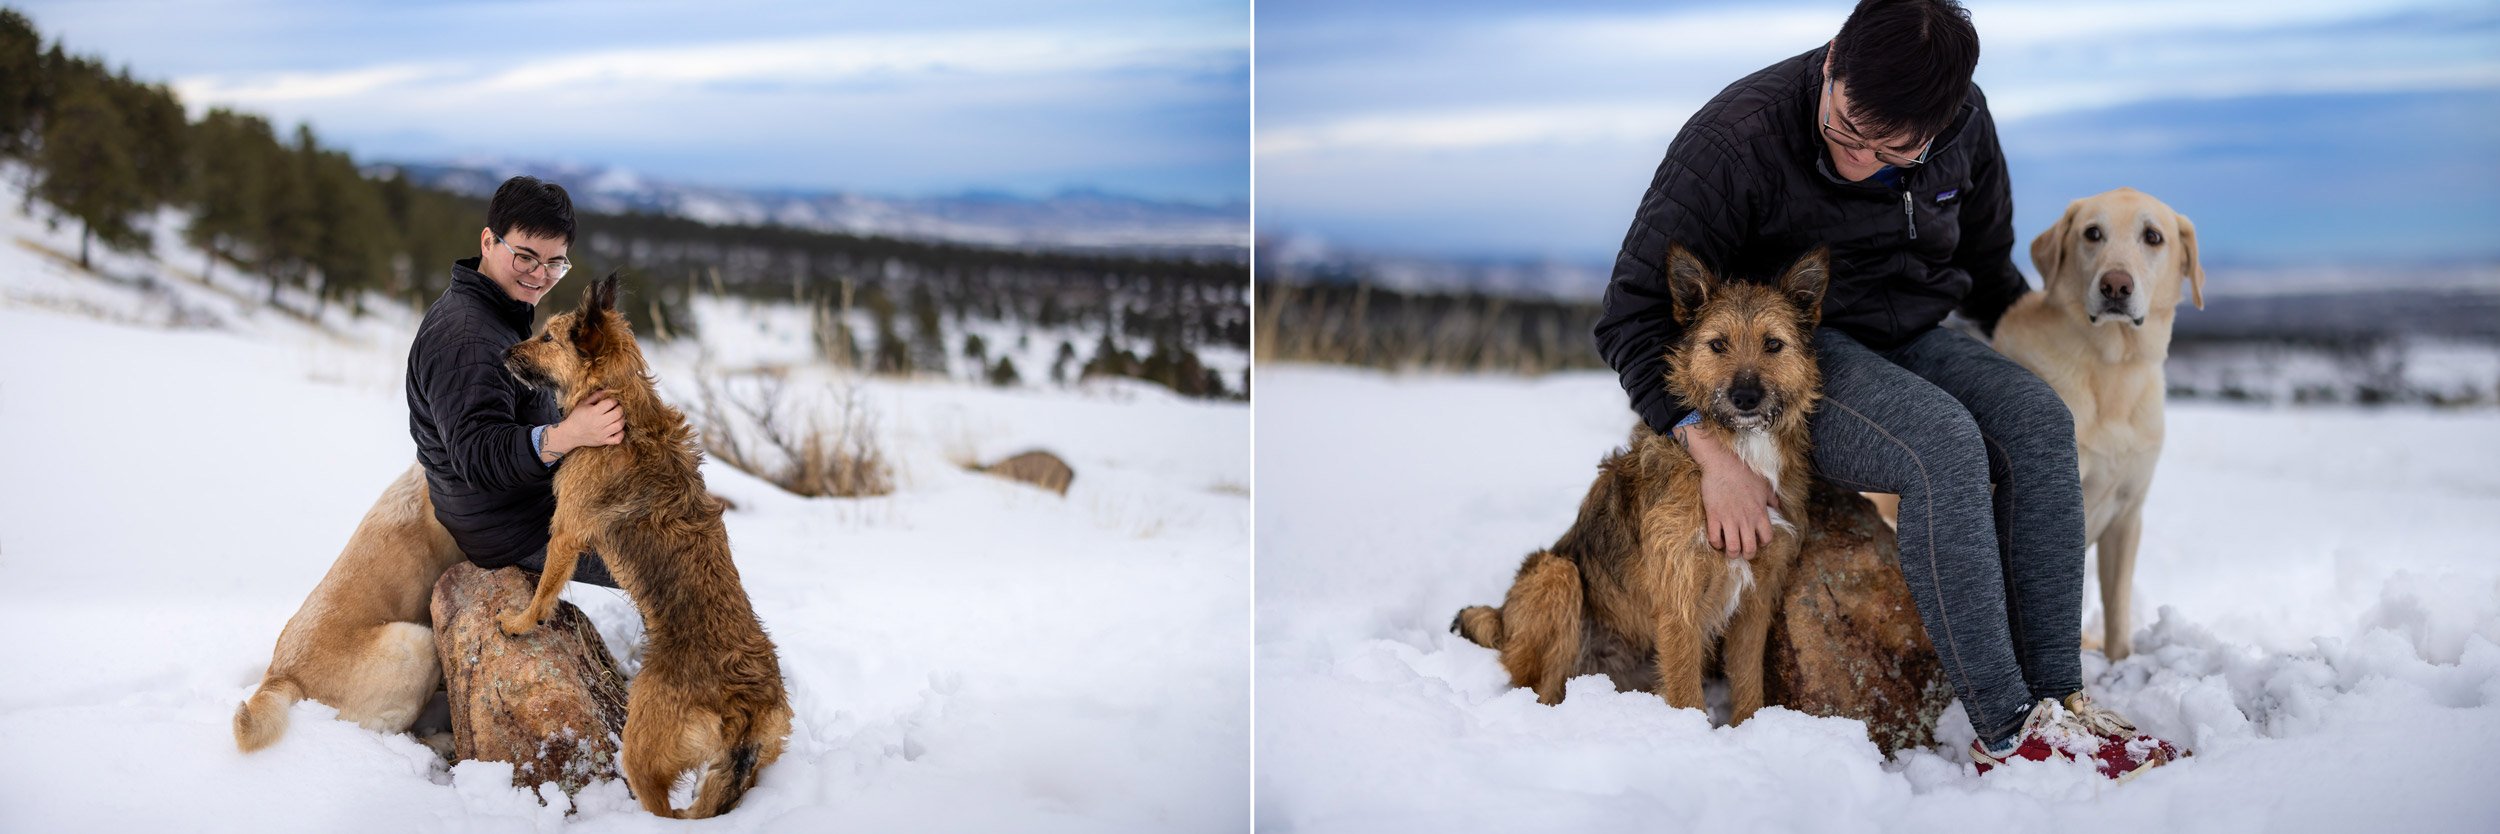 person-snuggling-dogs-in-snow.jpg